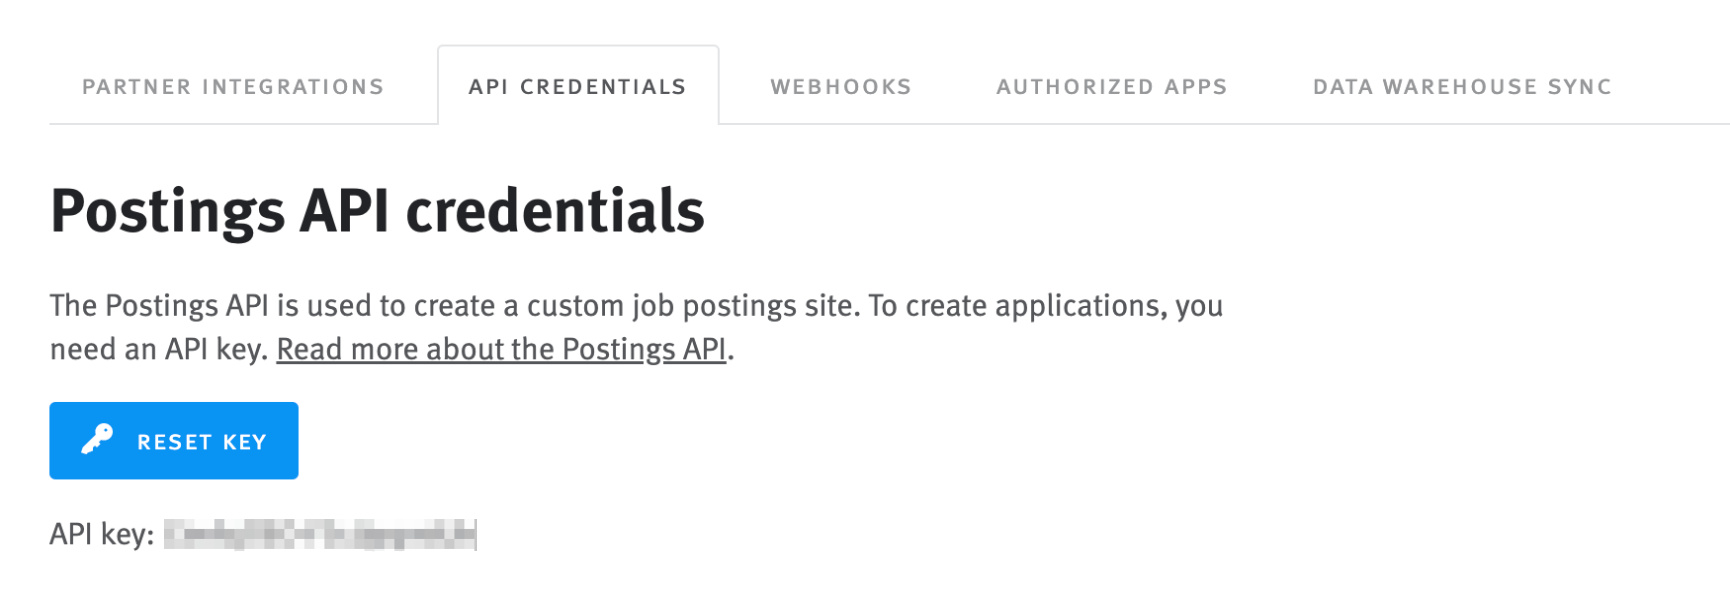 API credentials page in Integrations and API settings; close up of Posting API credentials section.